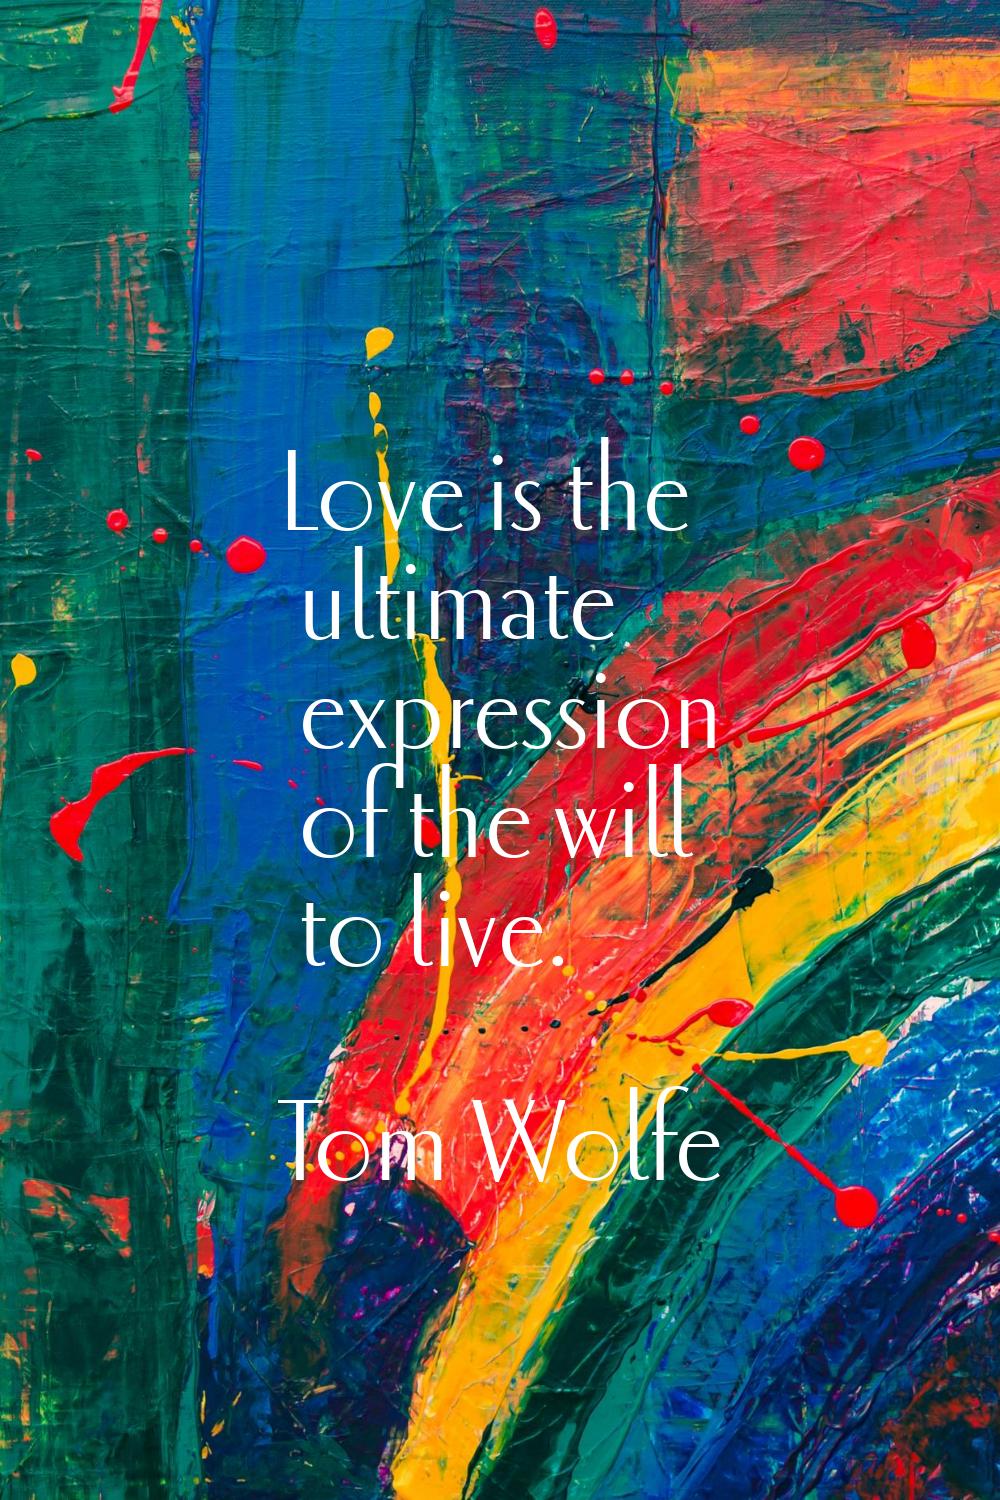 Love is the ultimate expression of the will to live.